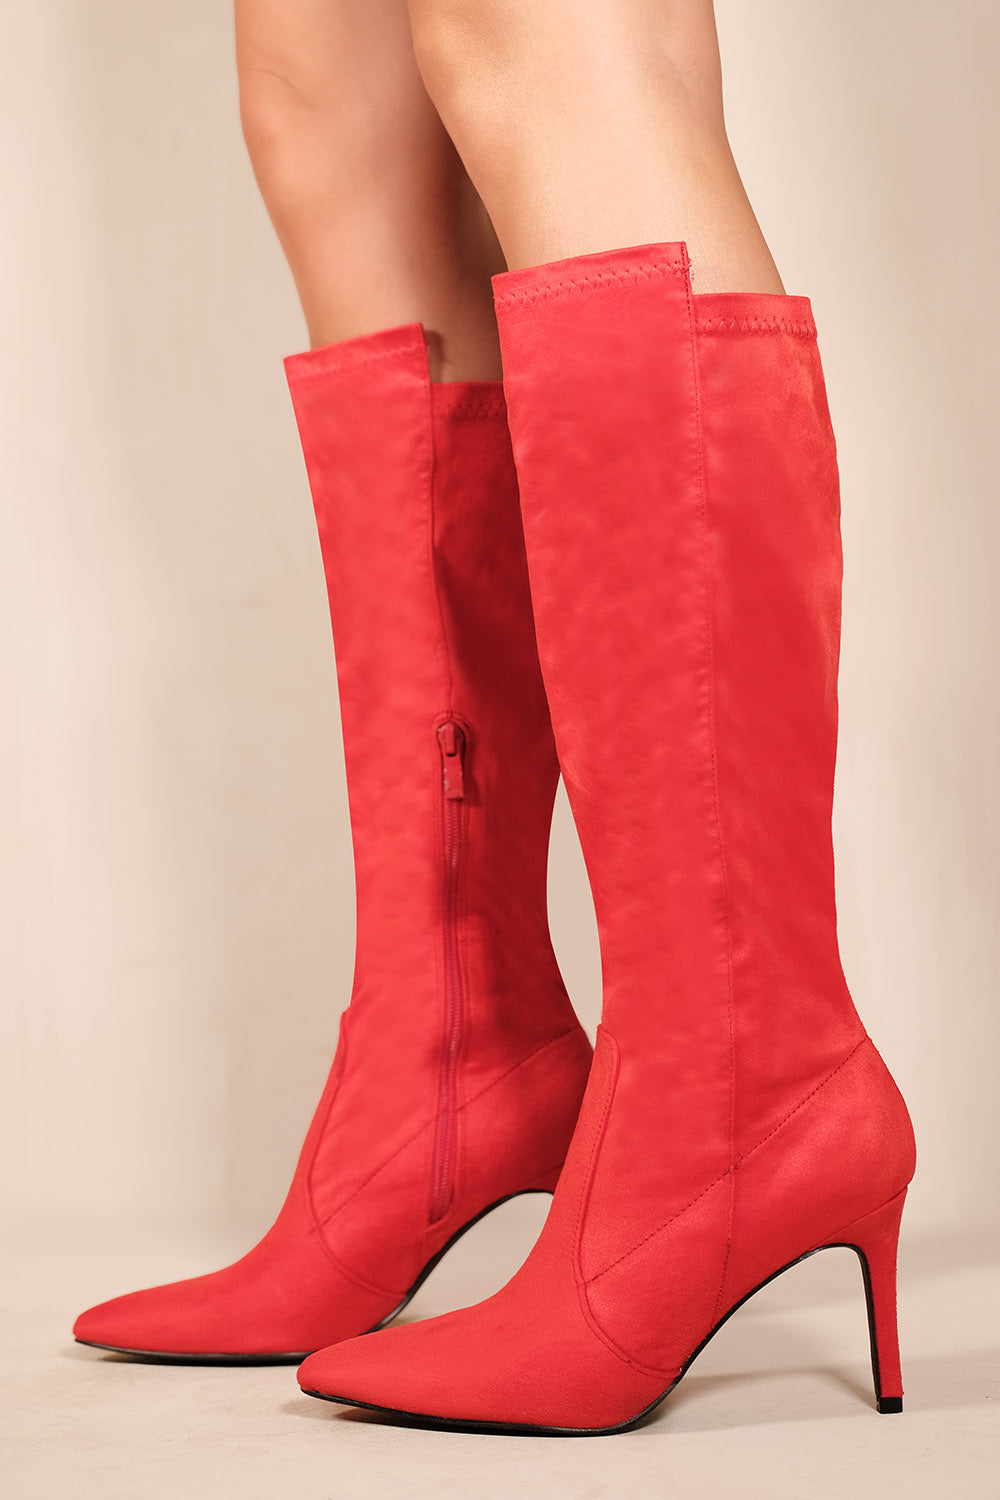 MARTA POINTED TOE CALF HIGH BOOTS WITH SIDE ZIP IN ROUGE RED FAUX SUEDE